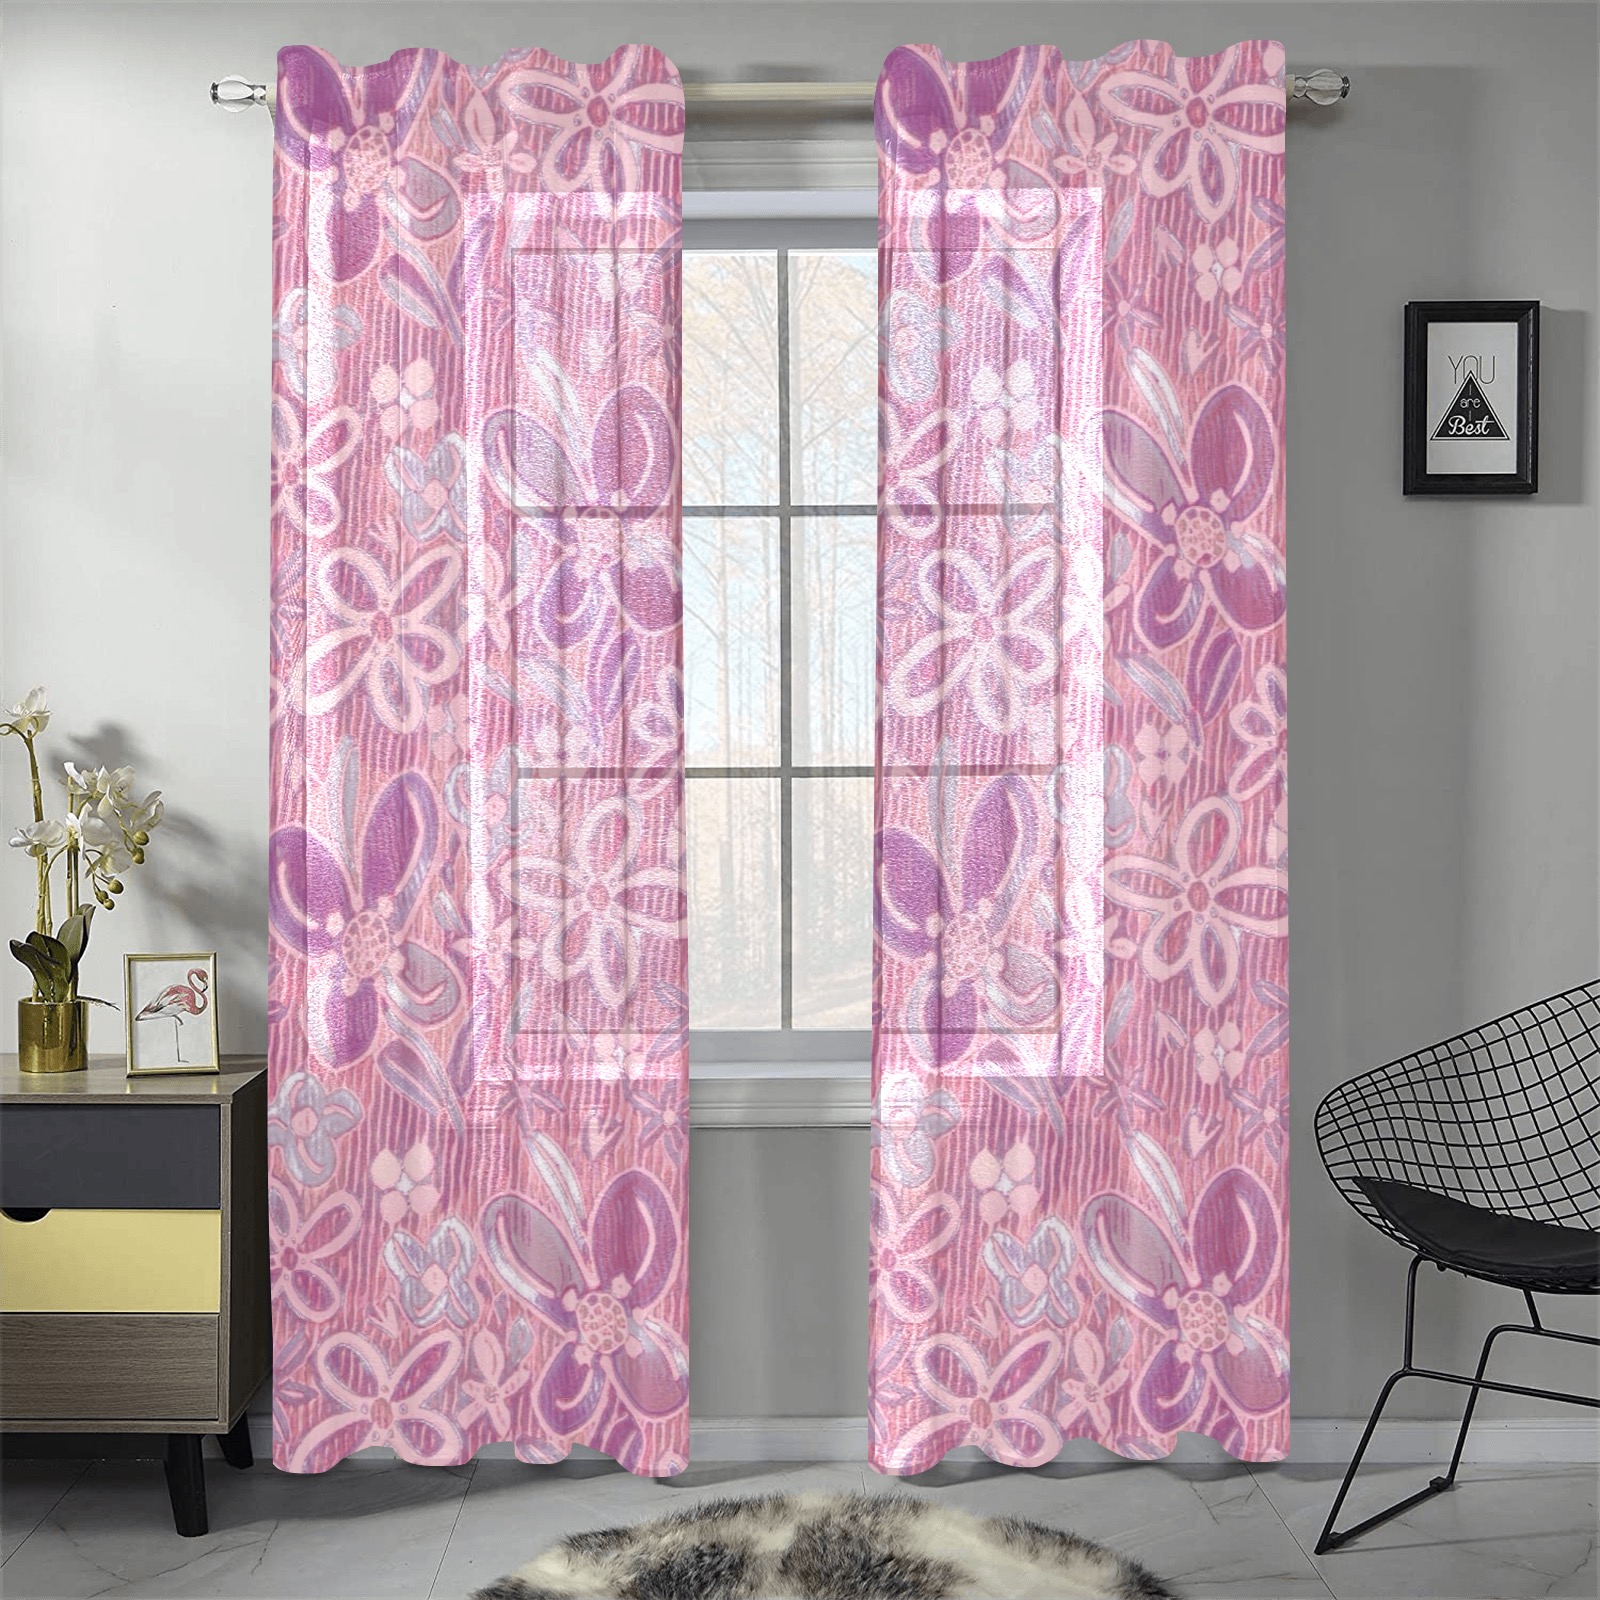 Cute floral pattern Gauze Curtain 28"x84" (Two-Piece)